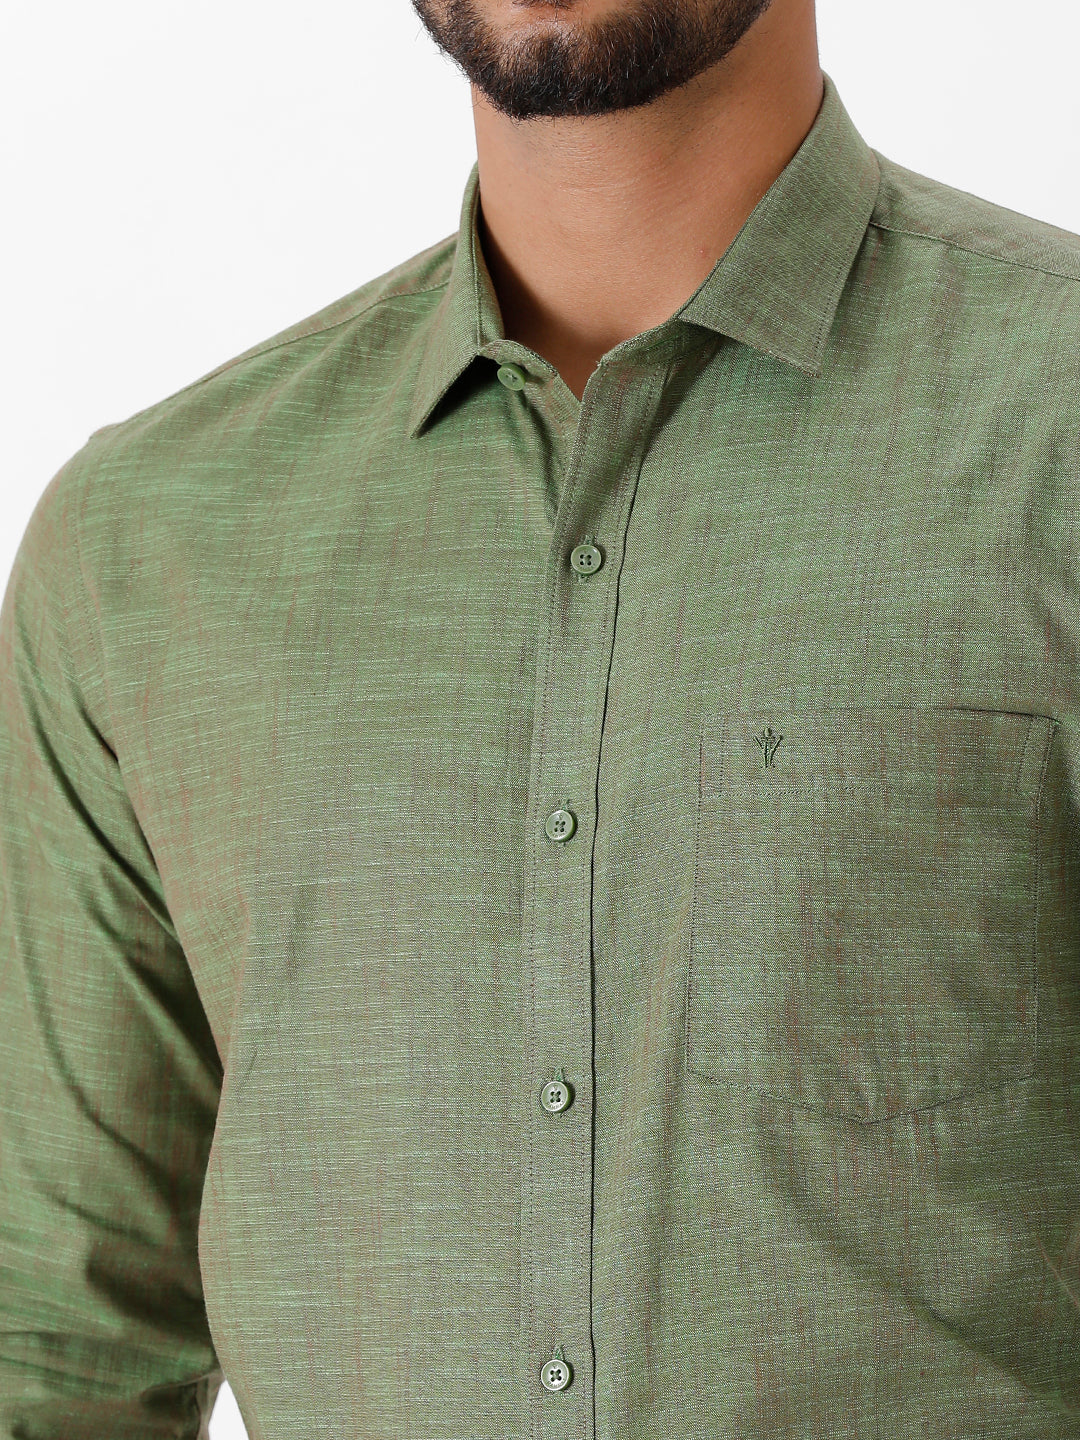 Mens Formal Shirt Full Sleeves Green CL2 GT19-Zoom view